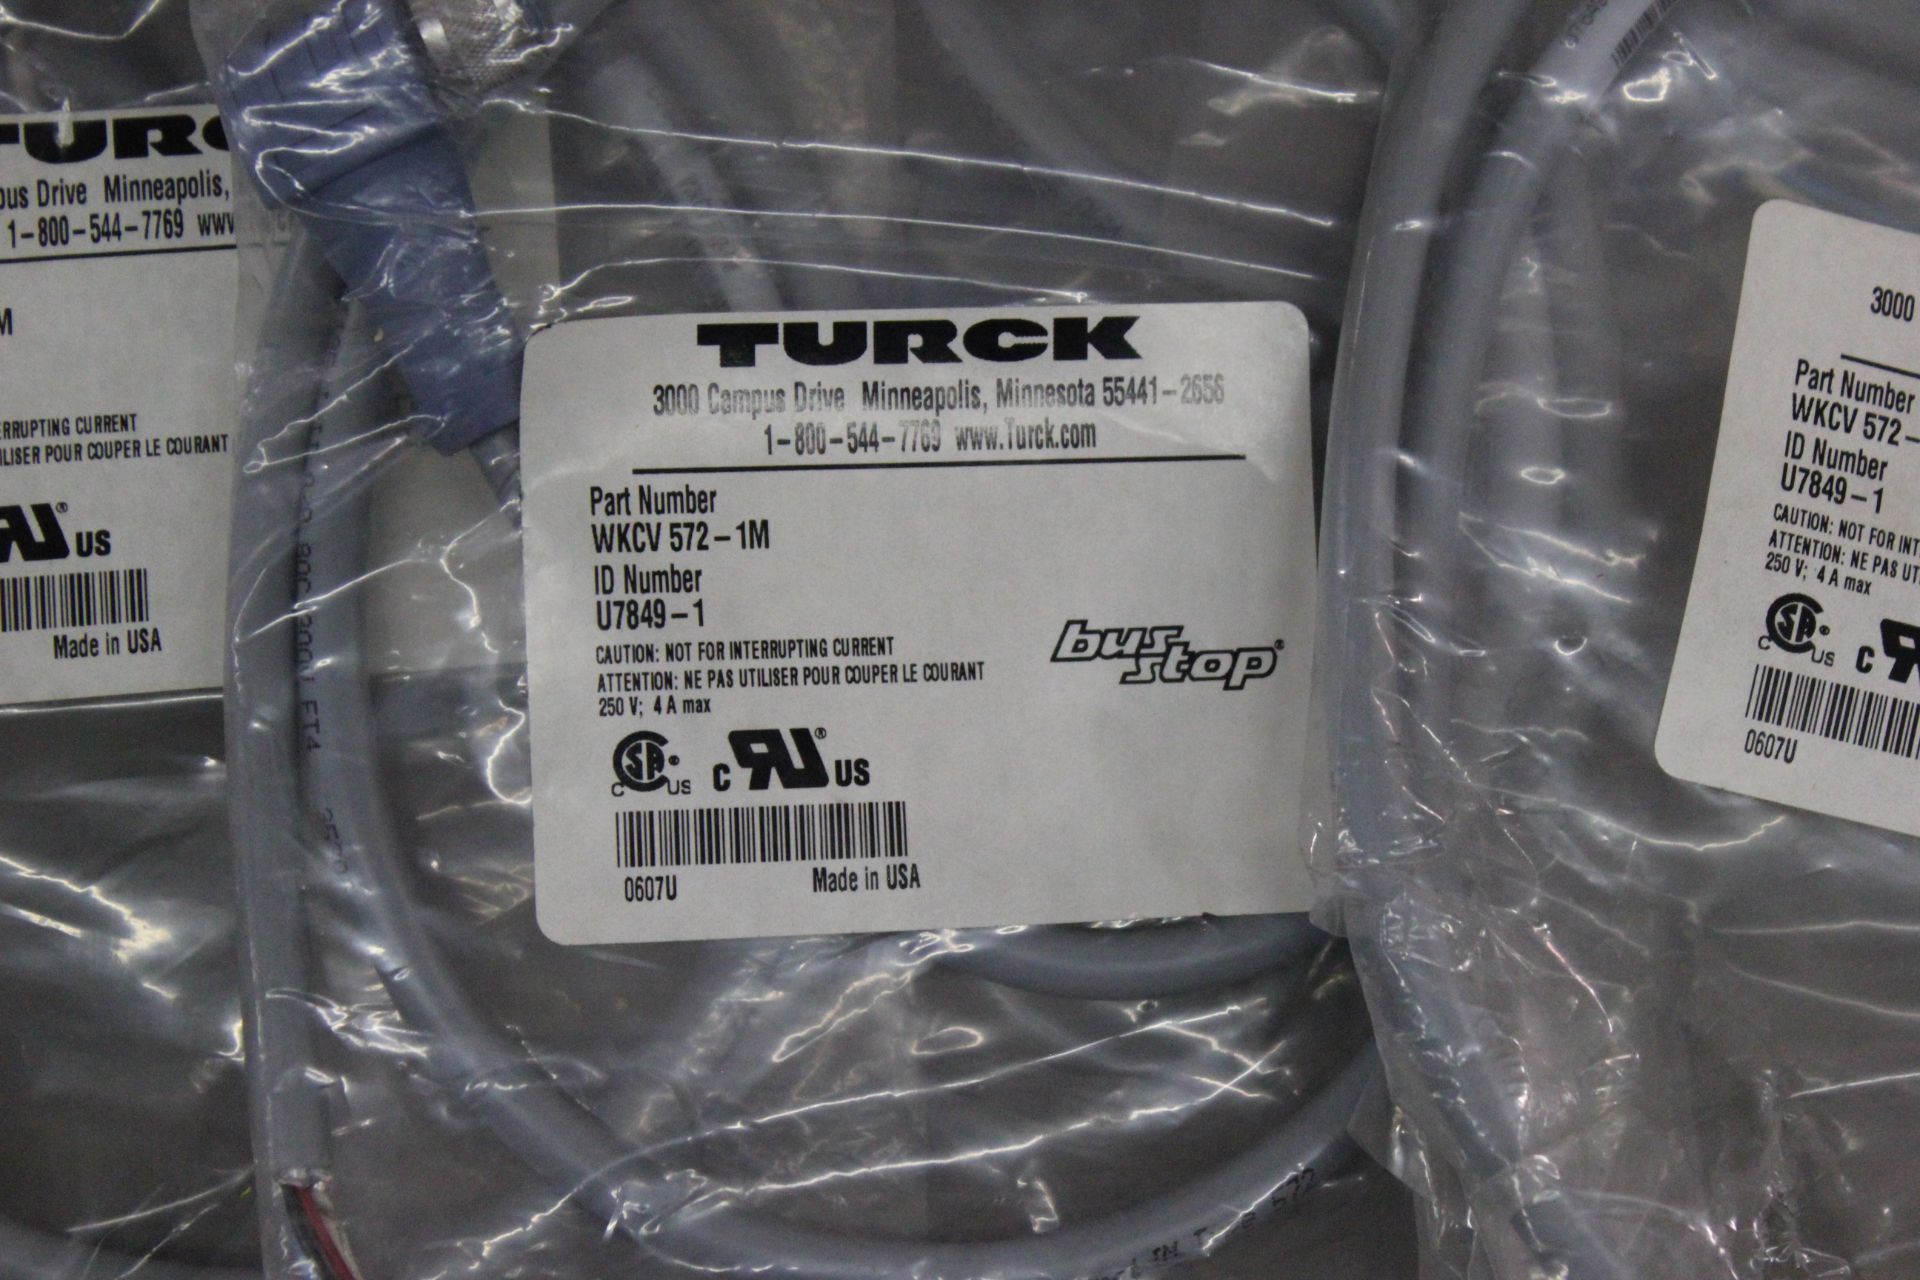 LOT OF NEW TURCK CABLES - Image 2 of 2